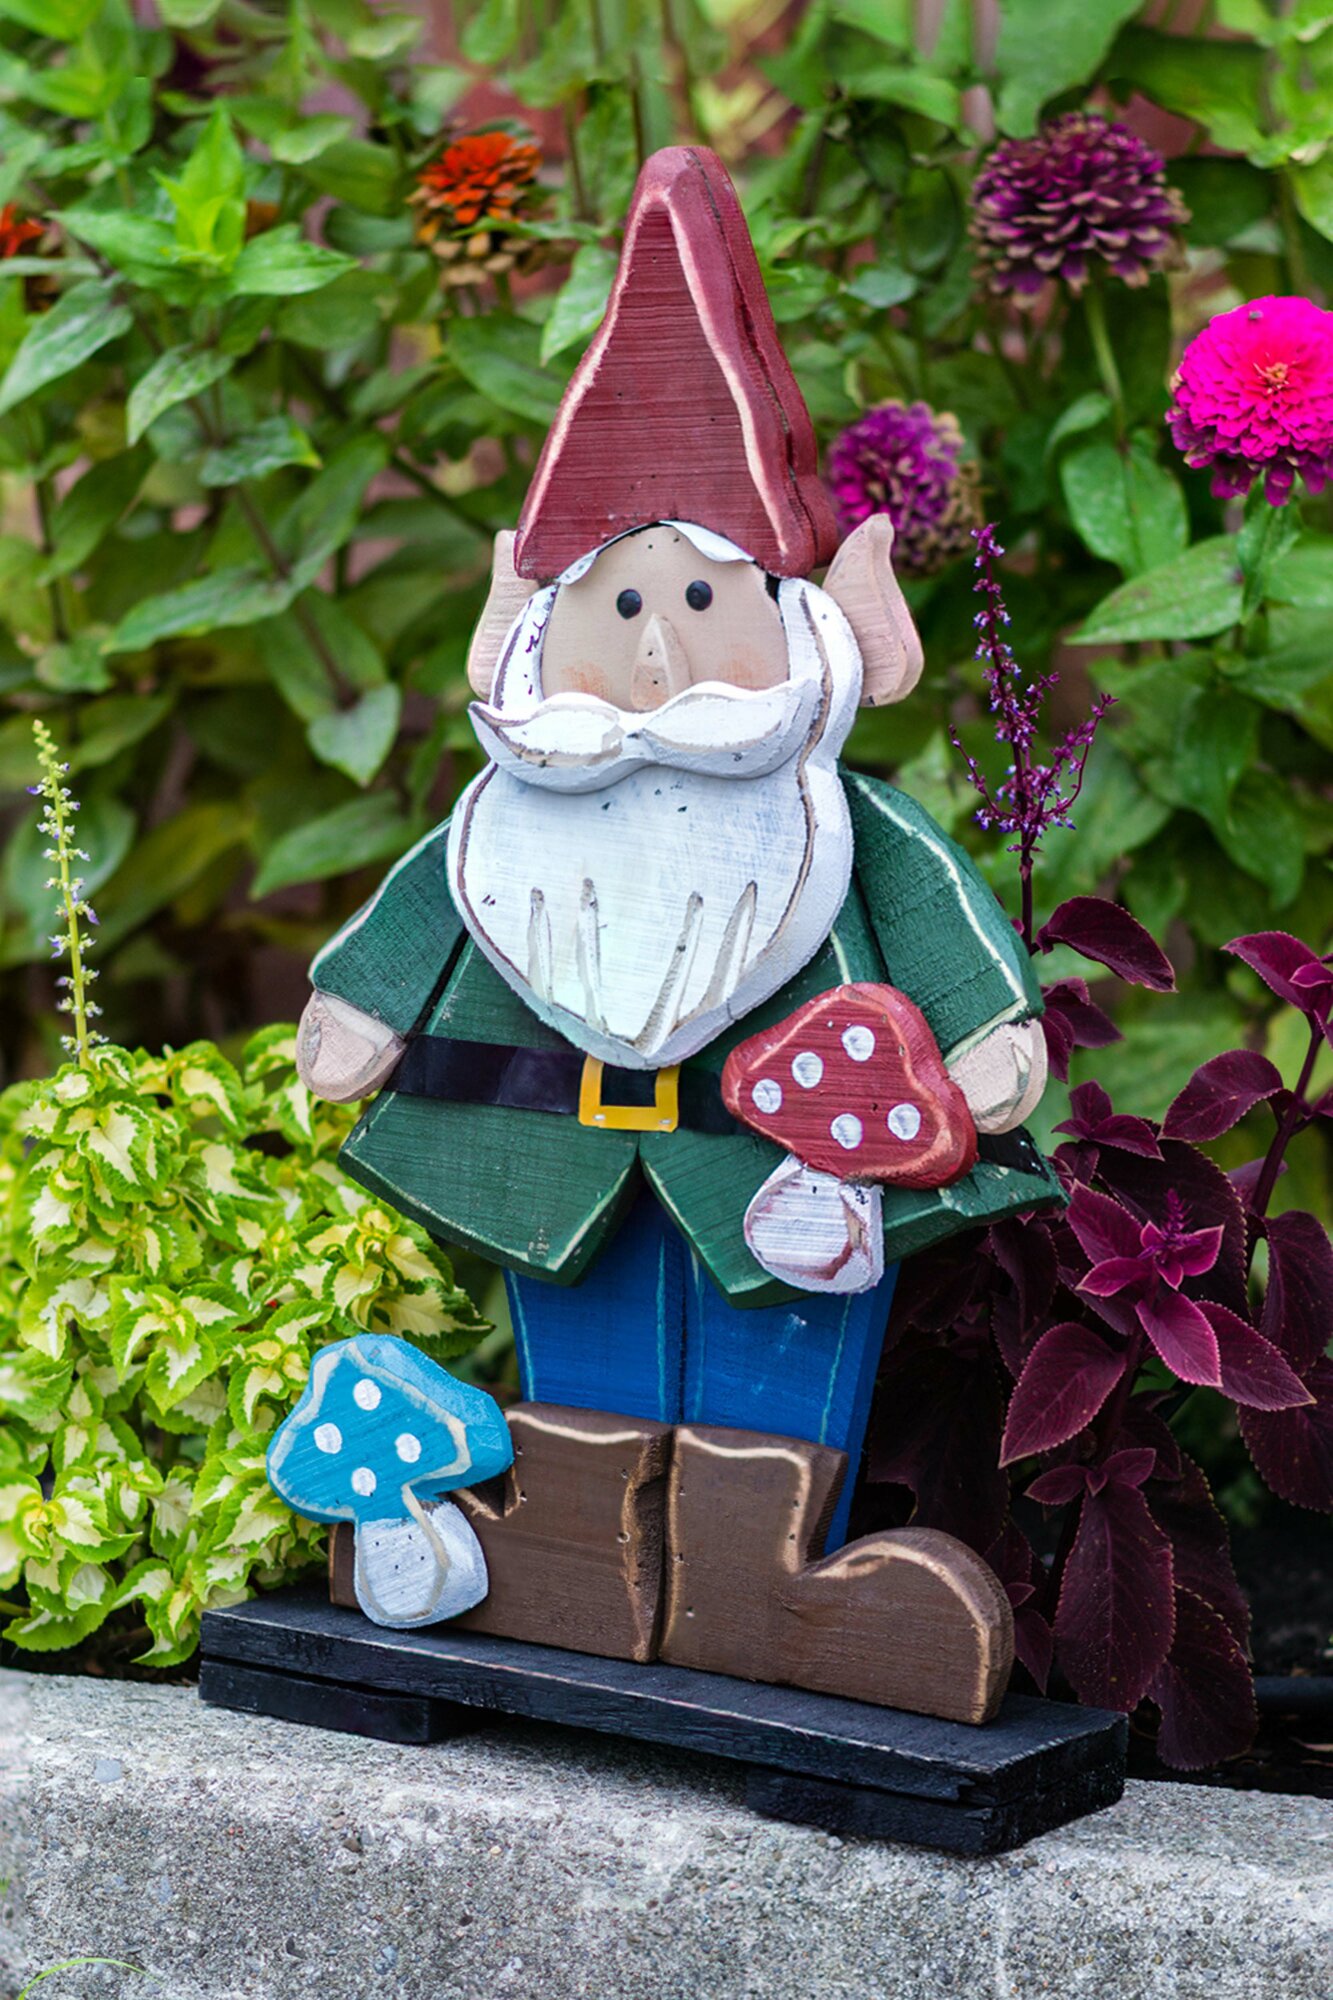 The Holiday Aisle Wooden Gnome in Jacket Figurine | eBay